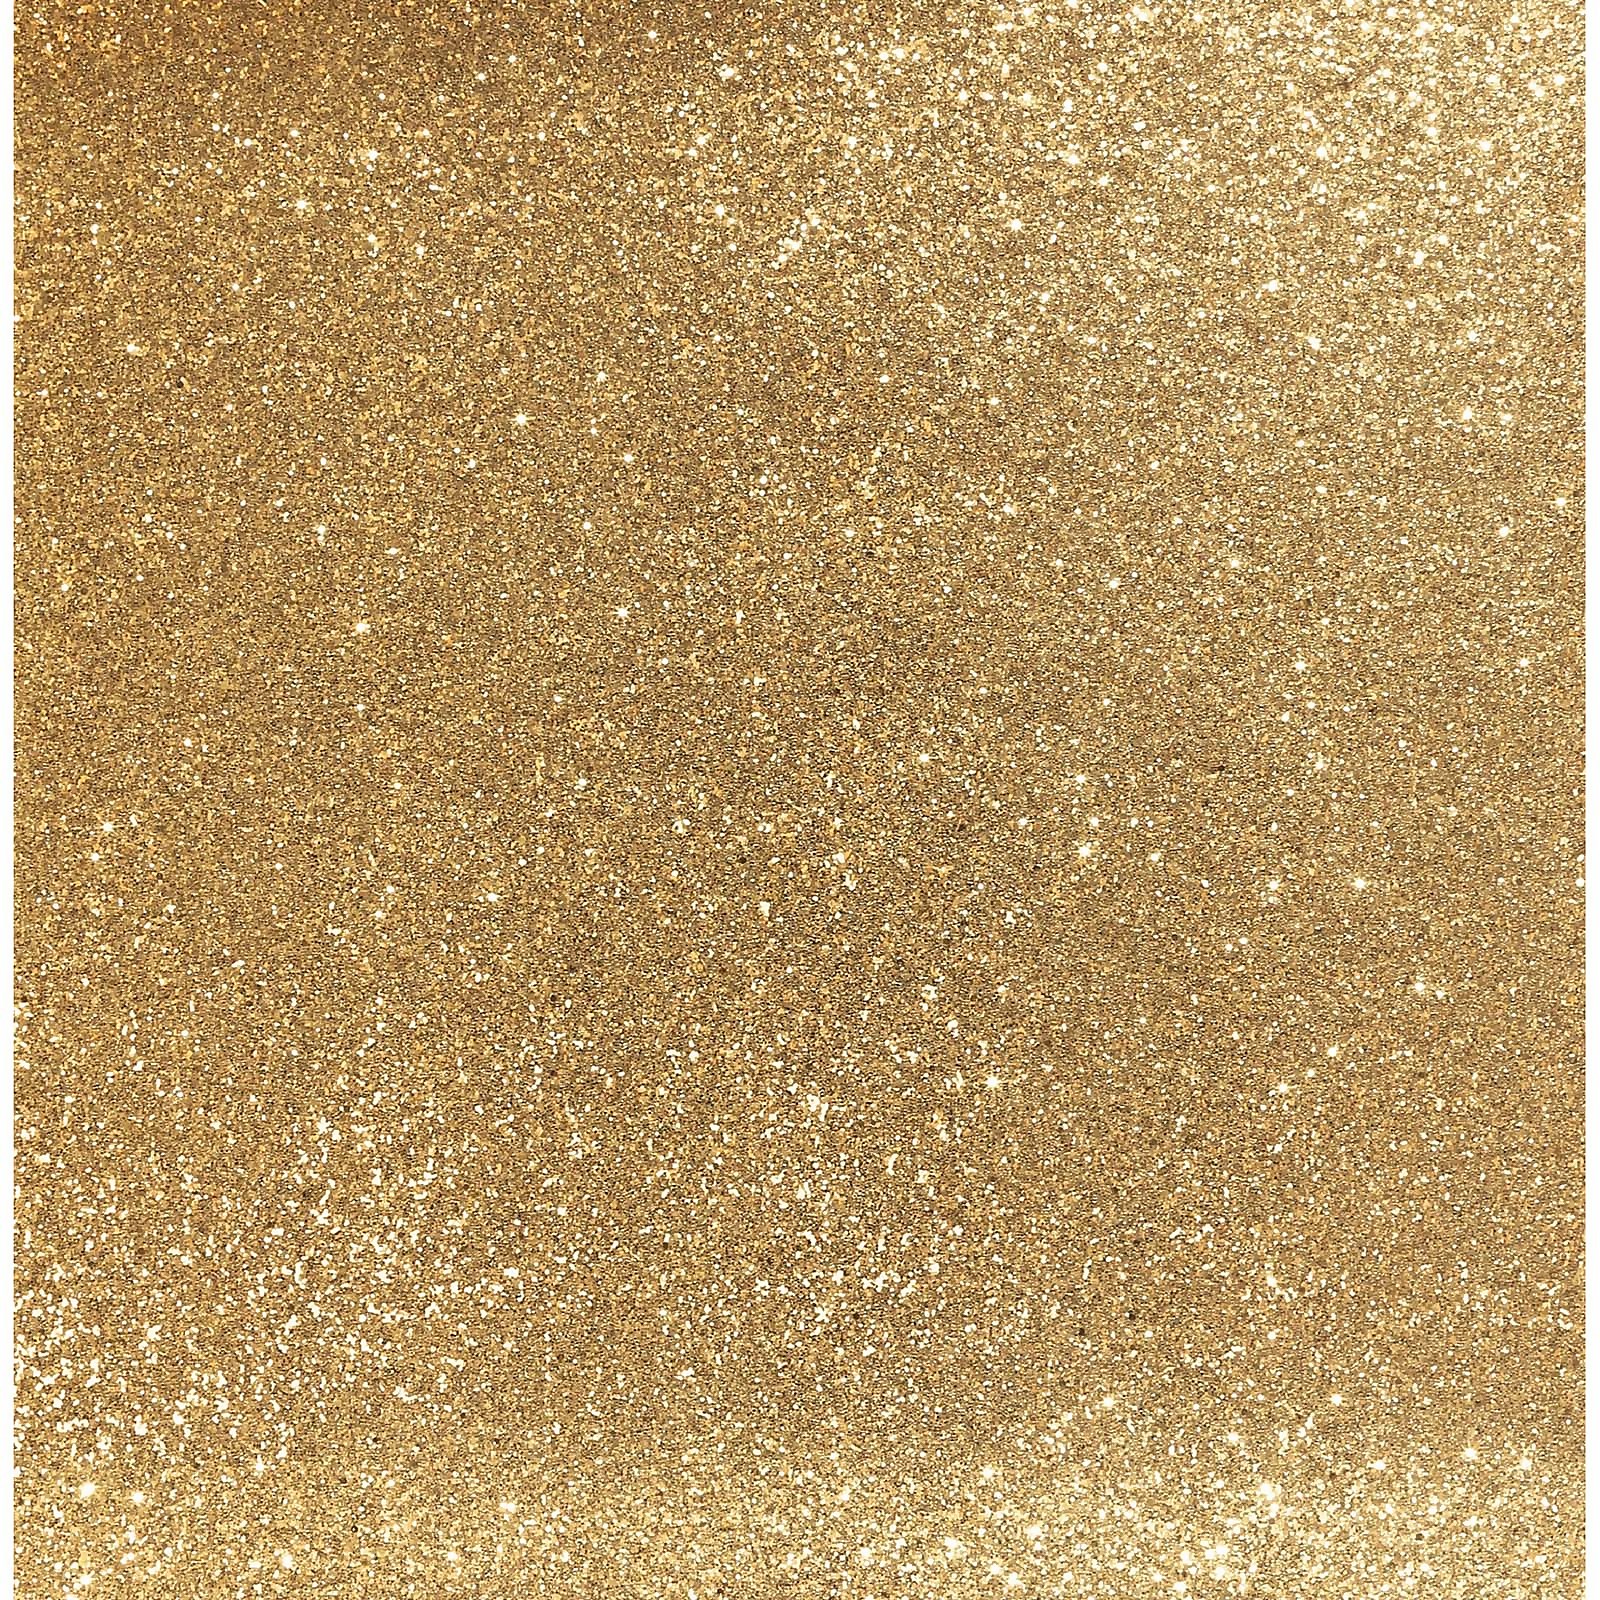 Photo of Arthouse Sequin Sparkle Gold Wallpaper Large Sample